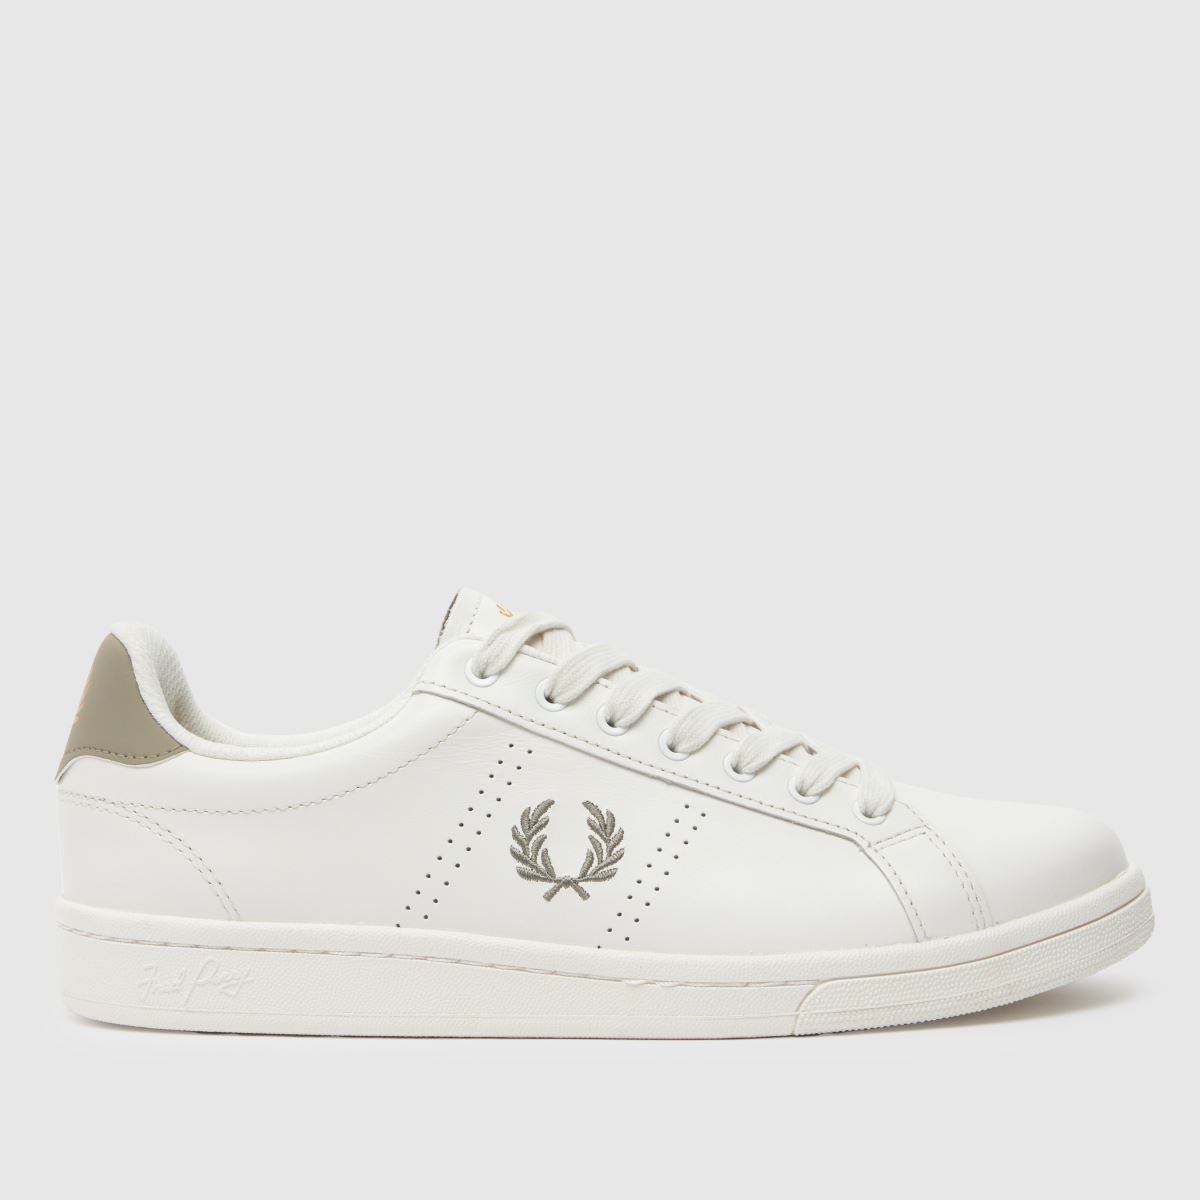 Fred Perry b721 trainers in white & grey